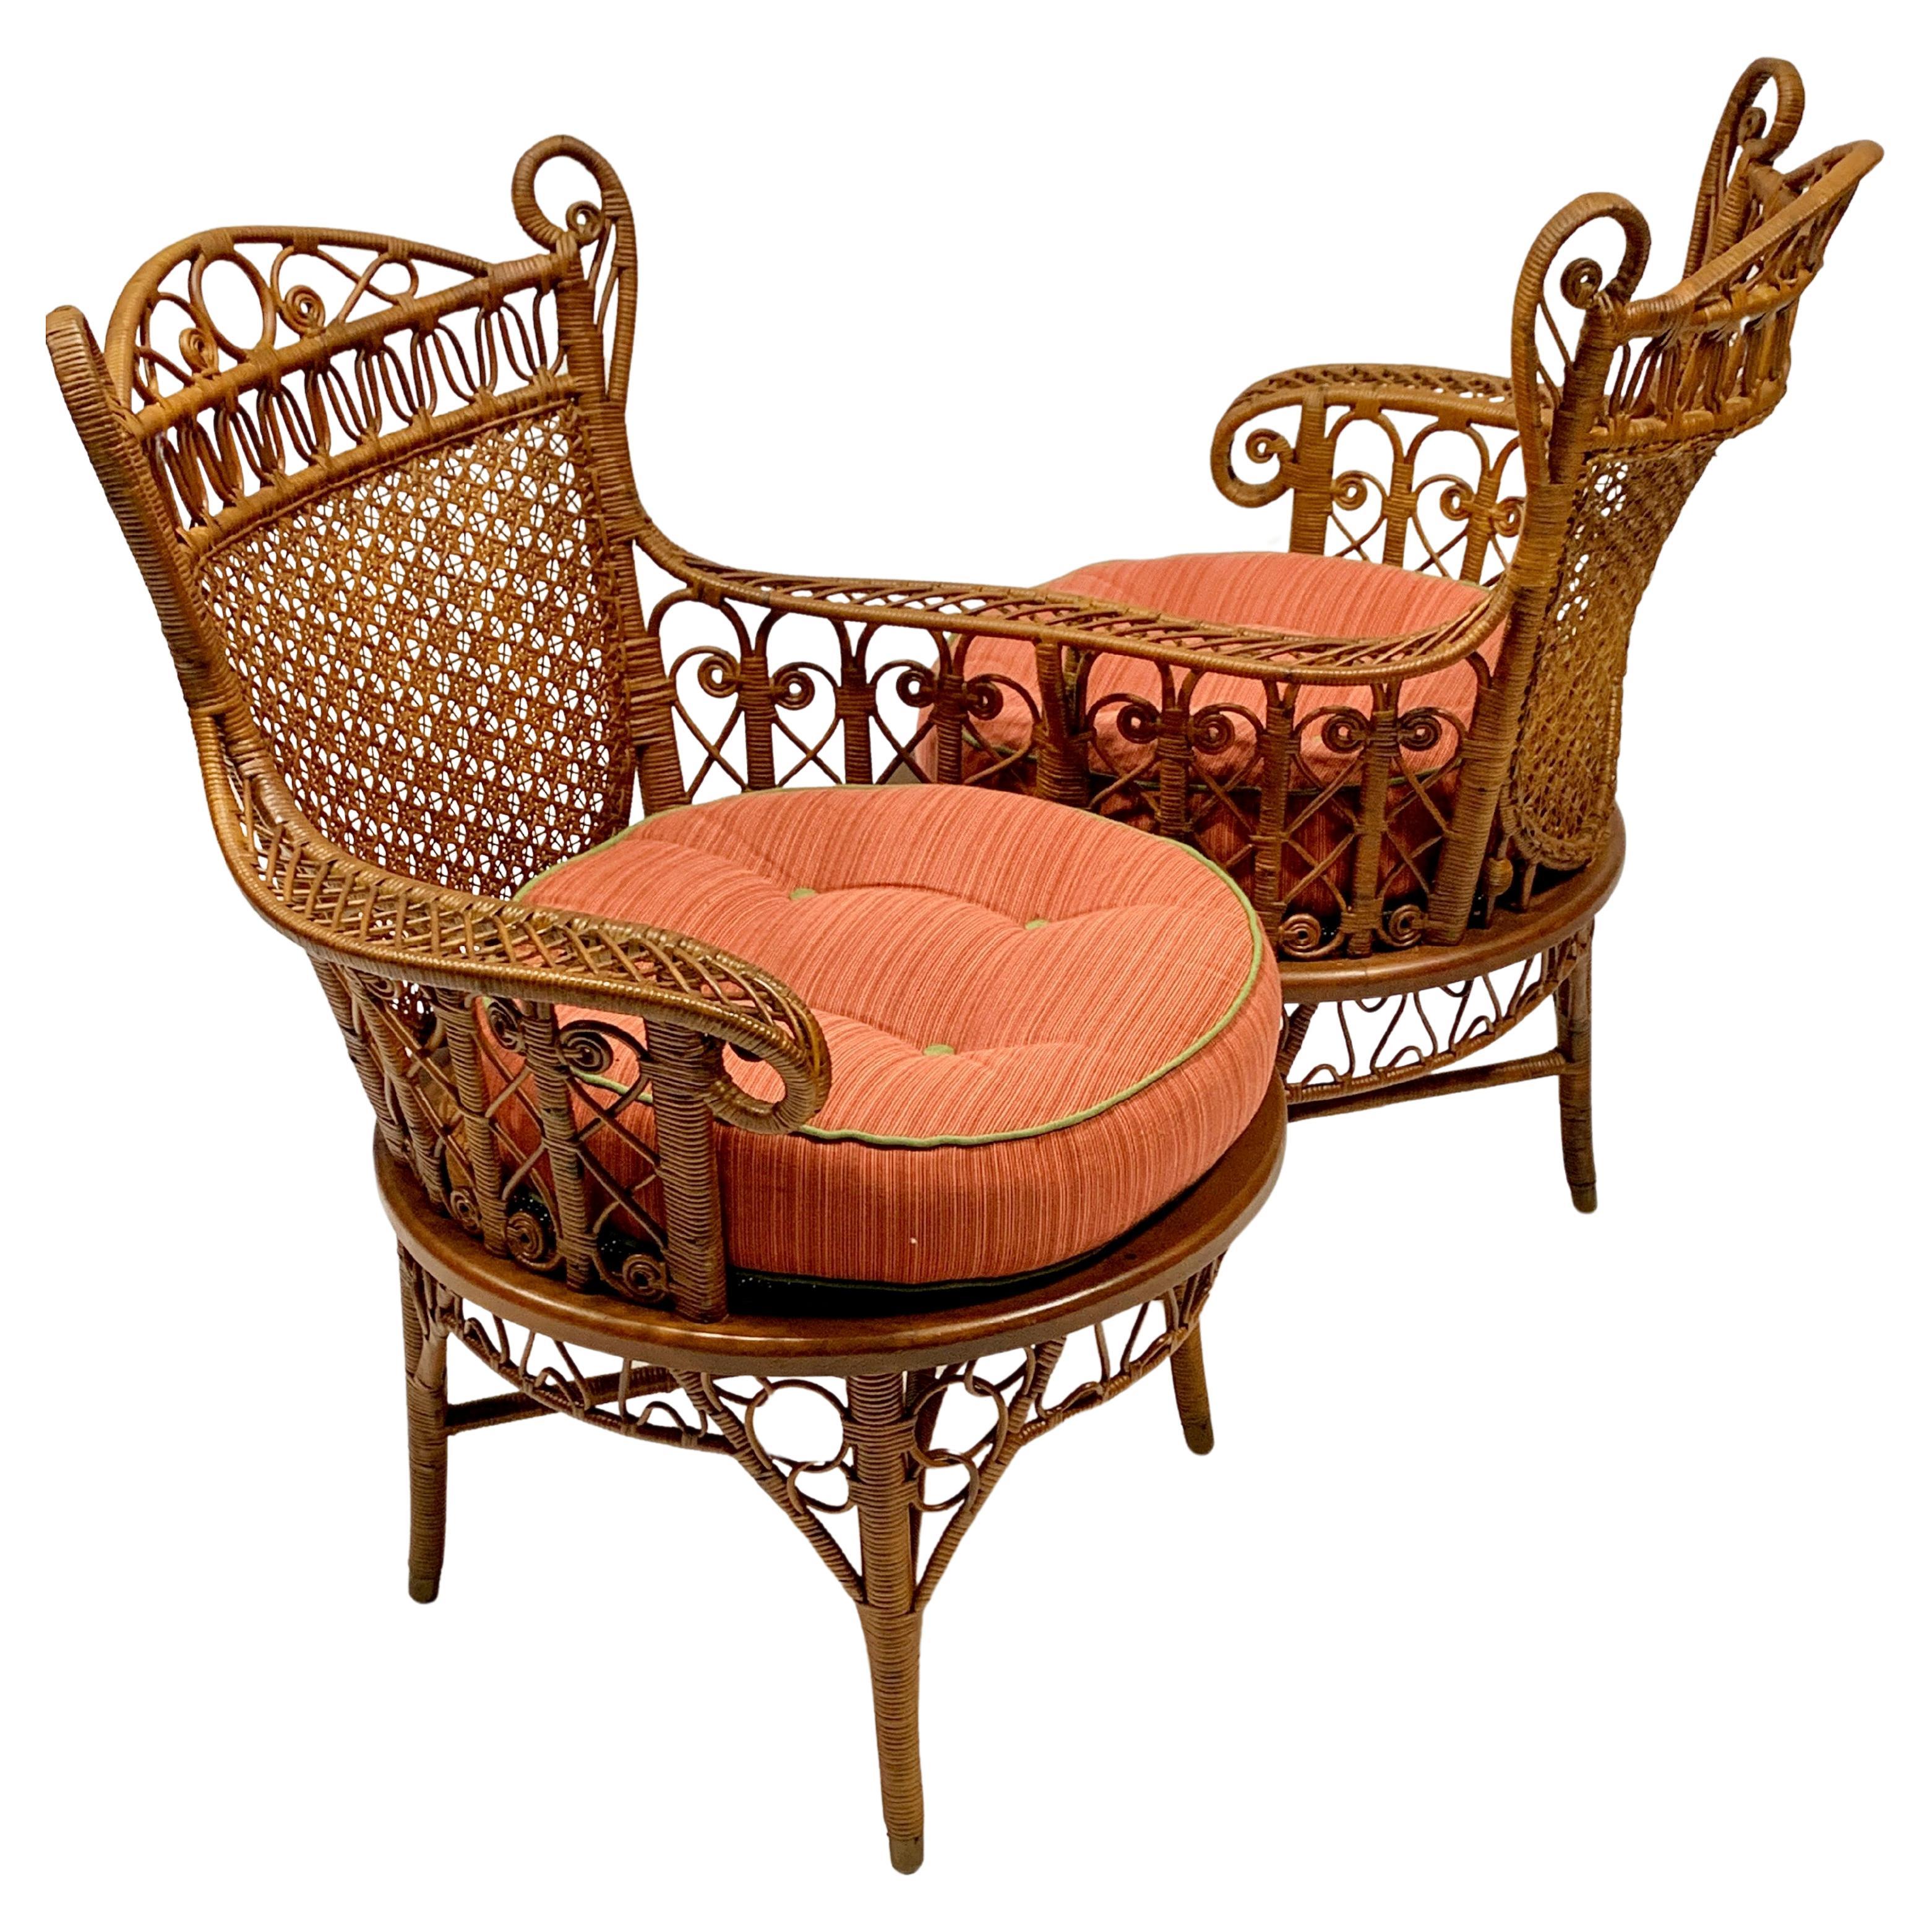 19th C. Wicker Tete-a-Tete Chair with Intricate Caned Backs in Natural Finish